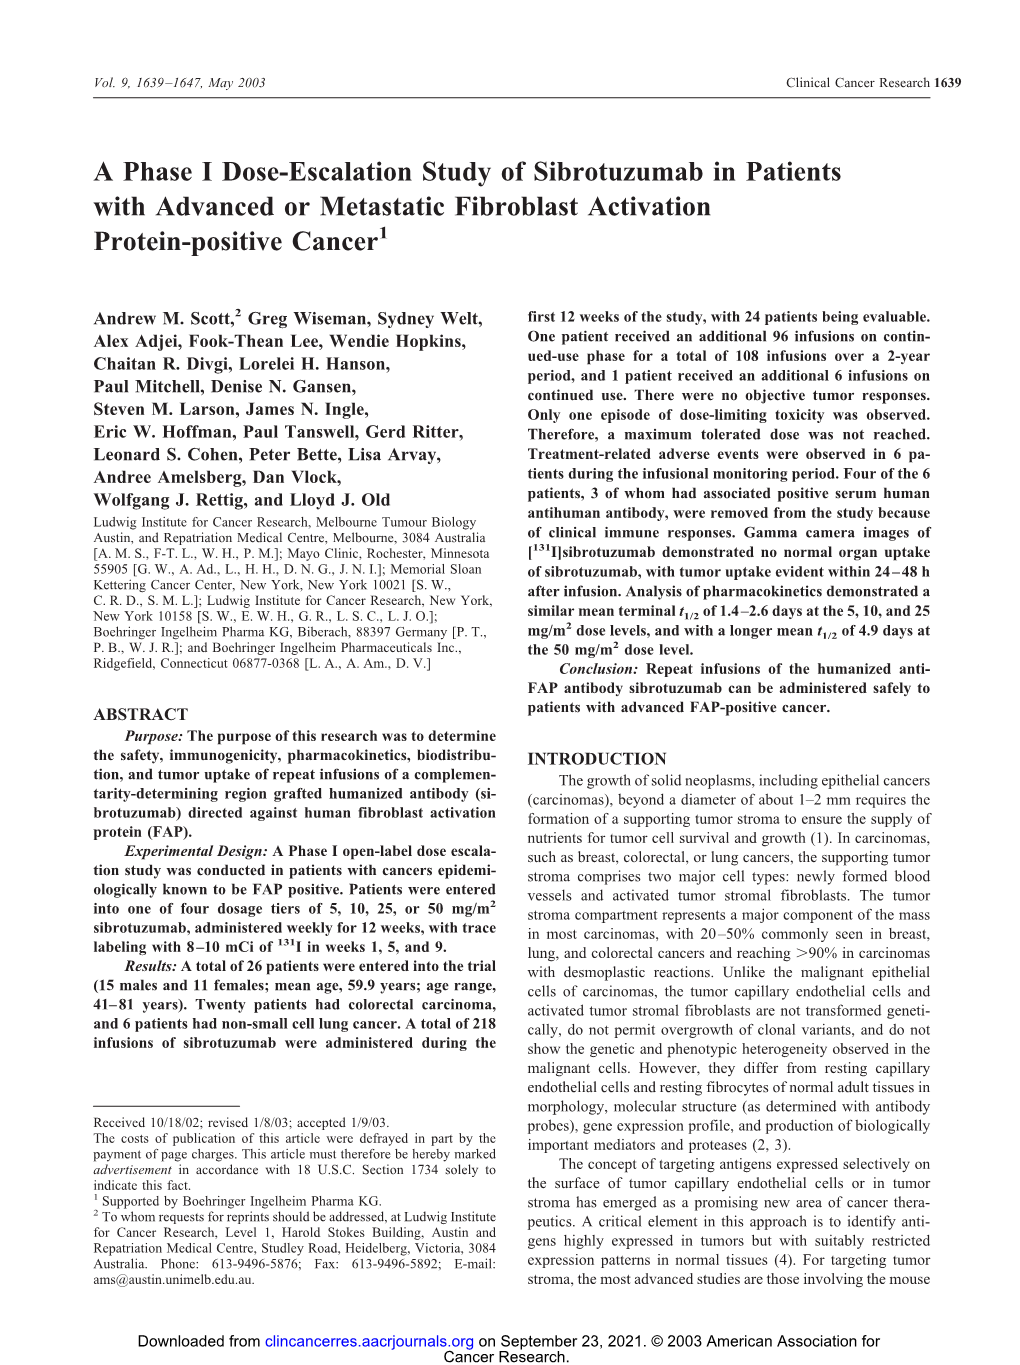 A Phase I Dose-Escalation Study of Sibrotuzumab in Patients with Advanced Or Metastatic Fibroblast Activation Protein-Positive Cancer1